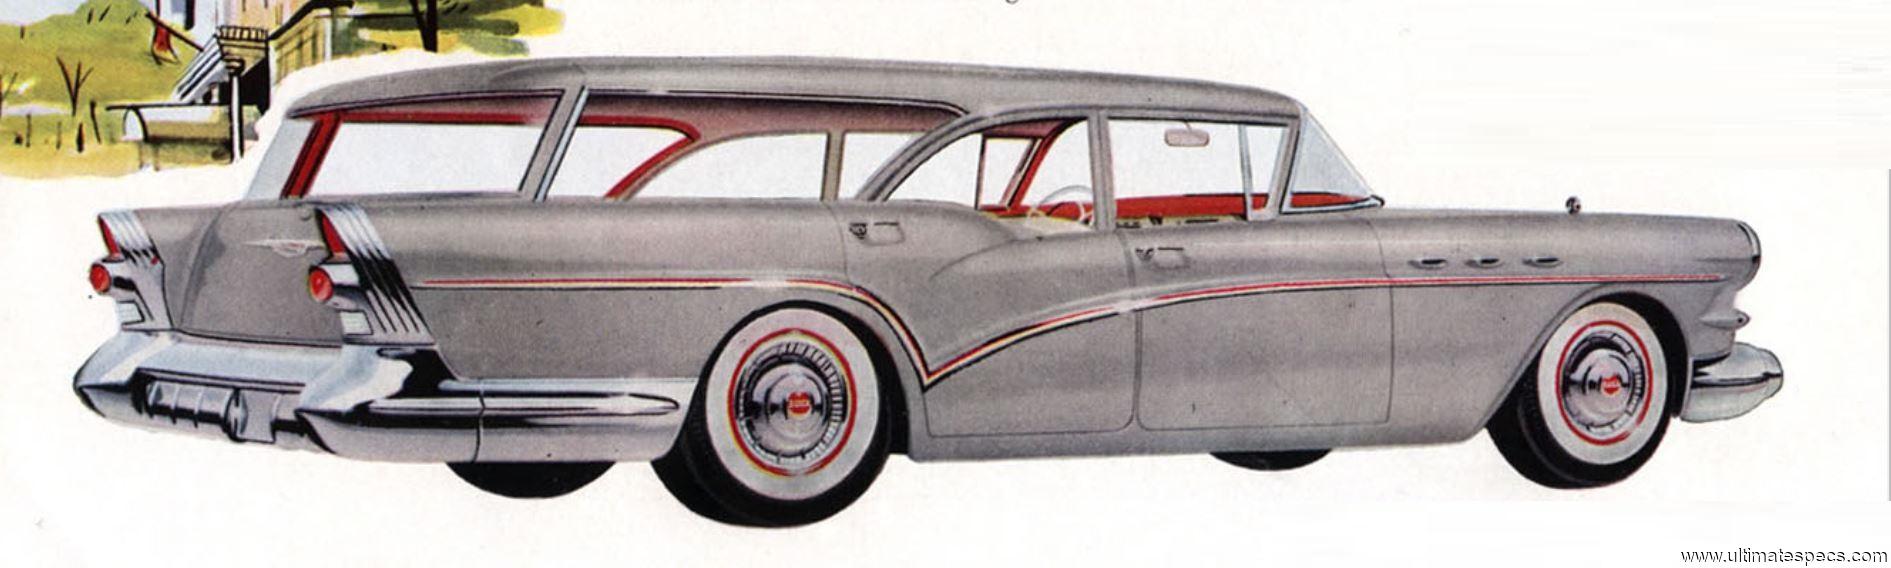 Buick Special Wagon 1957